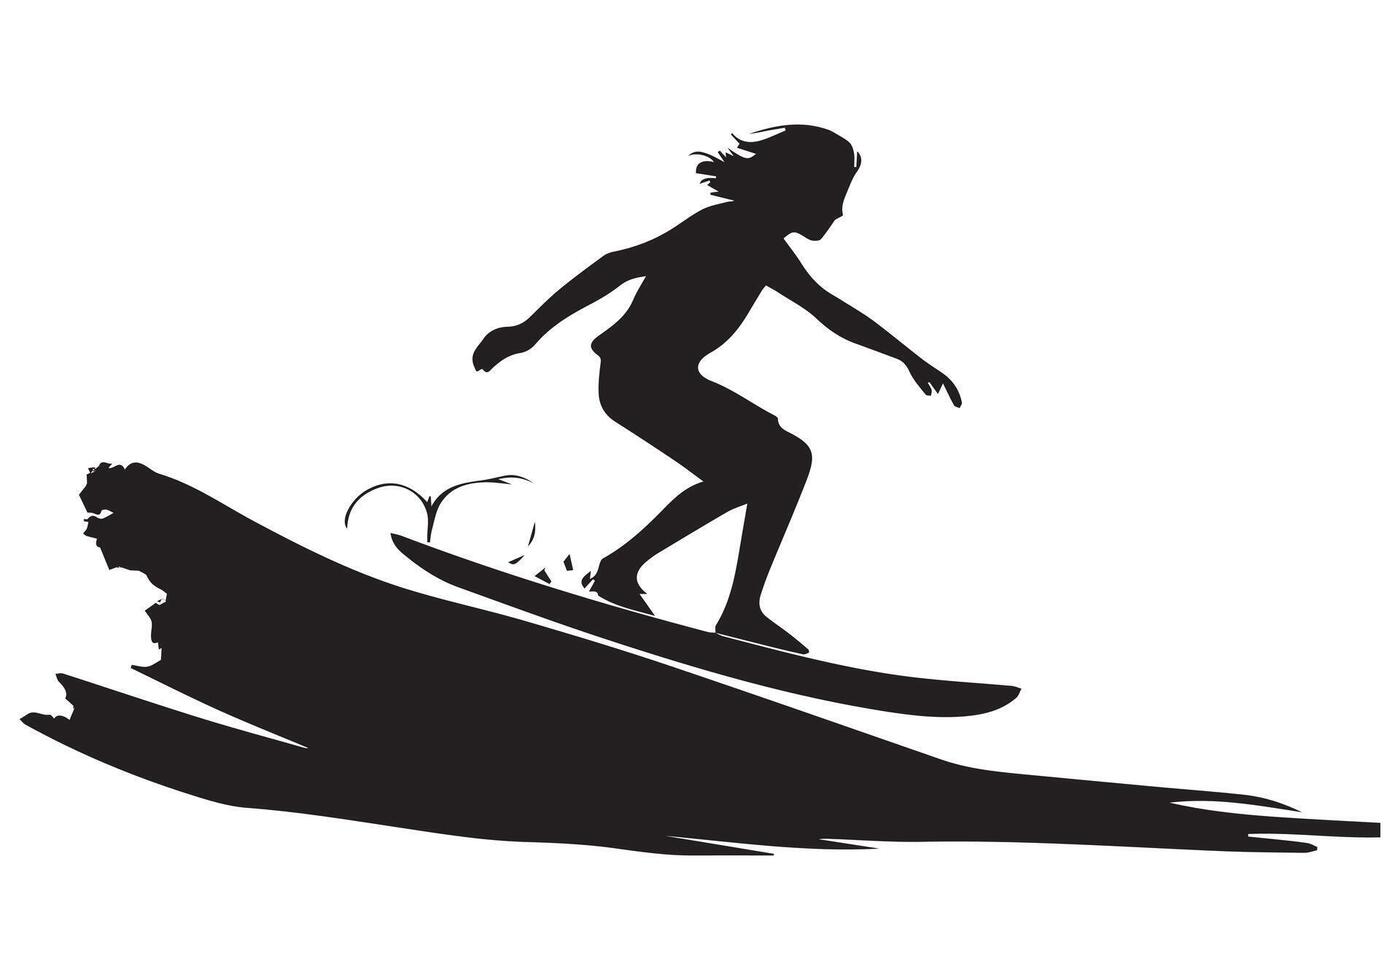 Surfing Silhouette design white background free vector